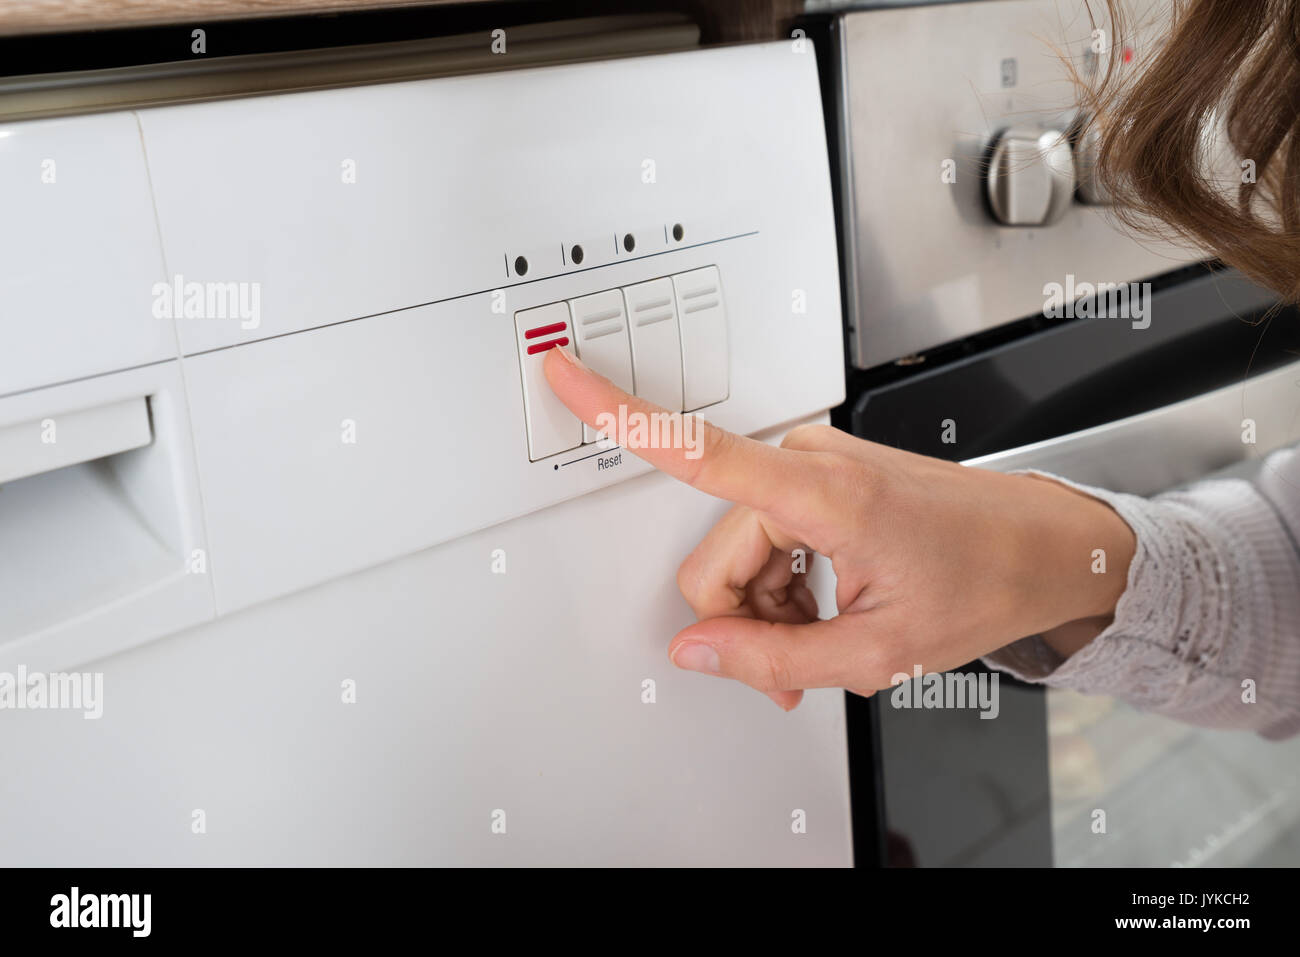 Close-up Of Person Hands Pressing Button Of Dishwasher Stock Photo